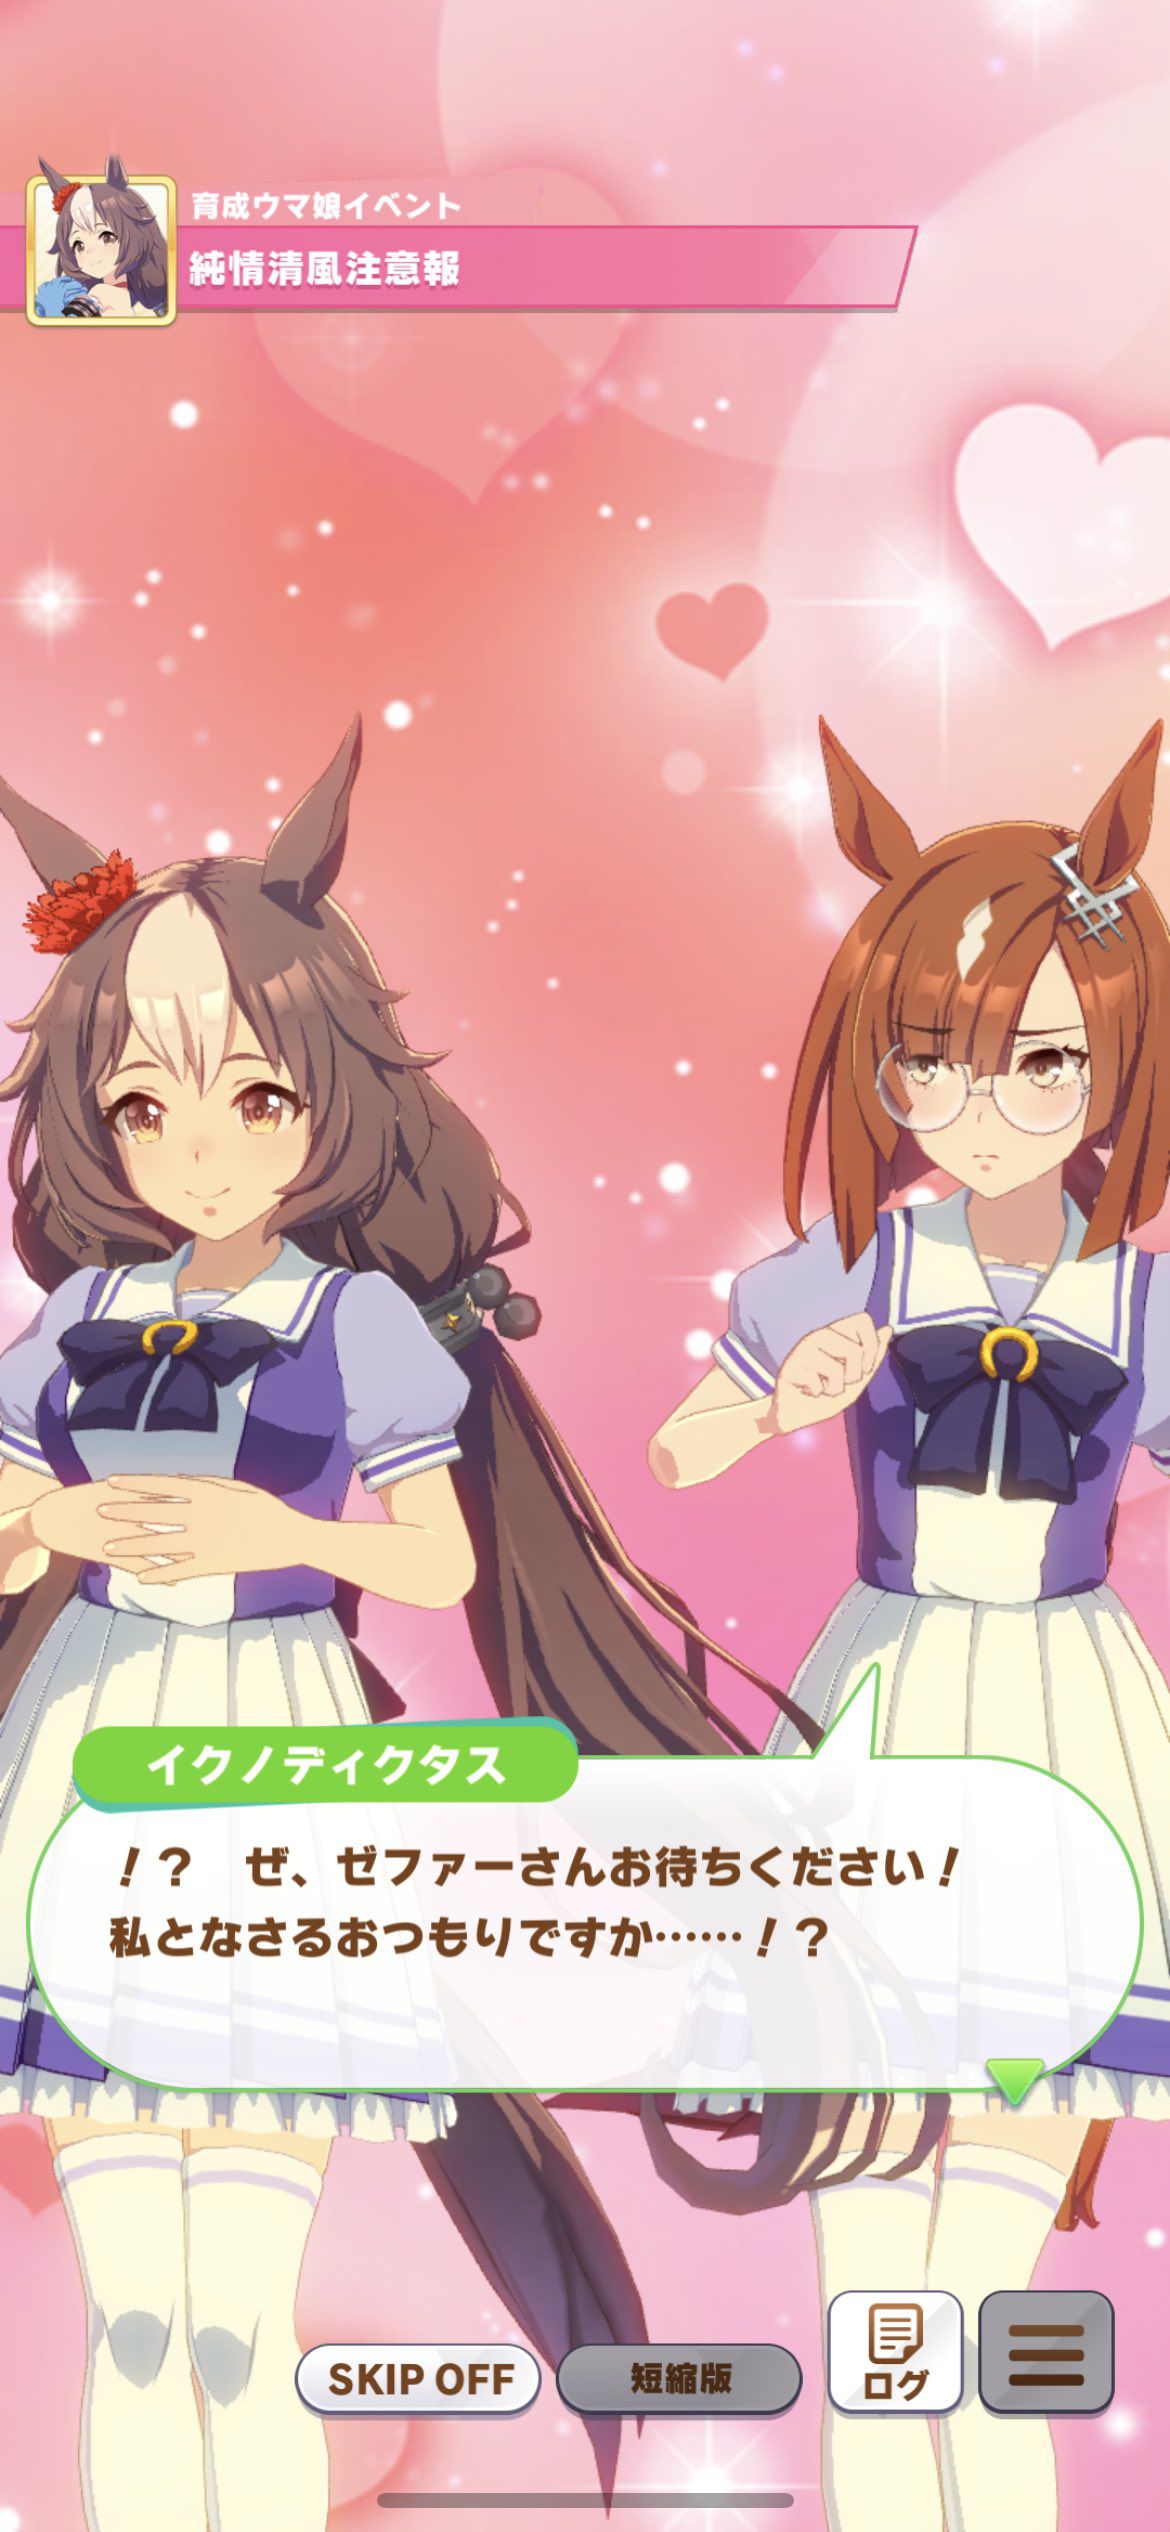 【Image】Uma Musume will implement a new character with the most erotic costume ever 15